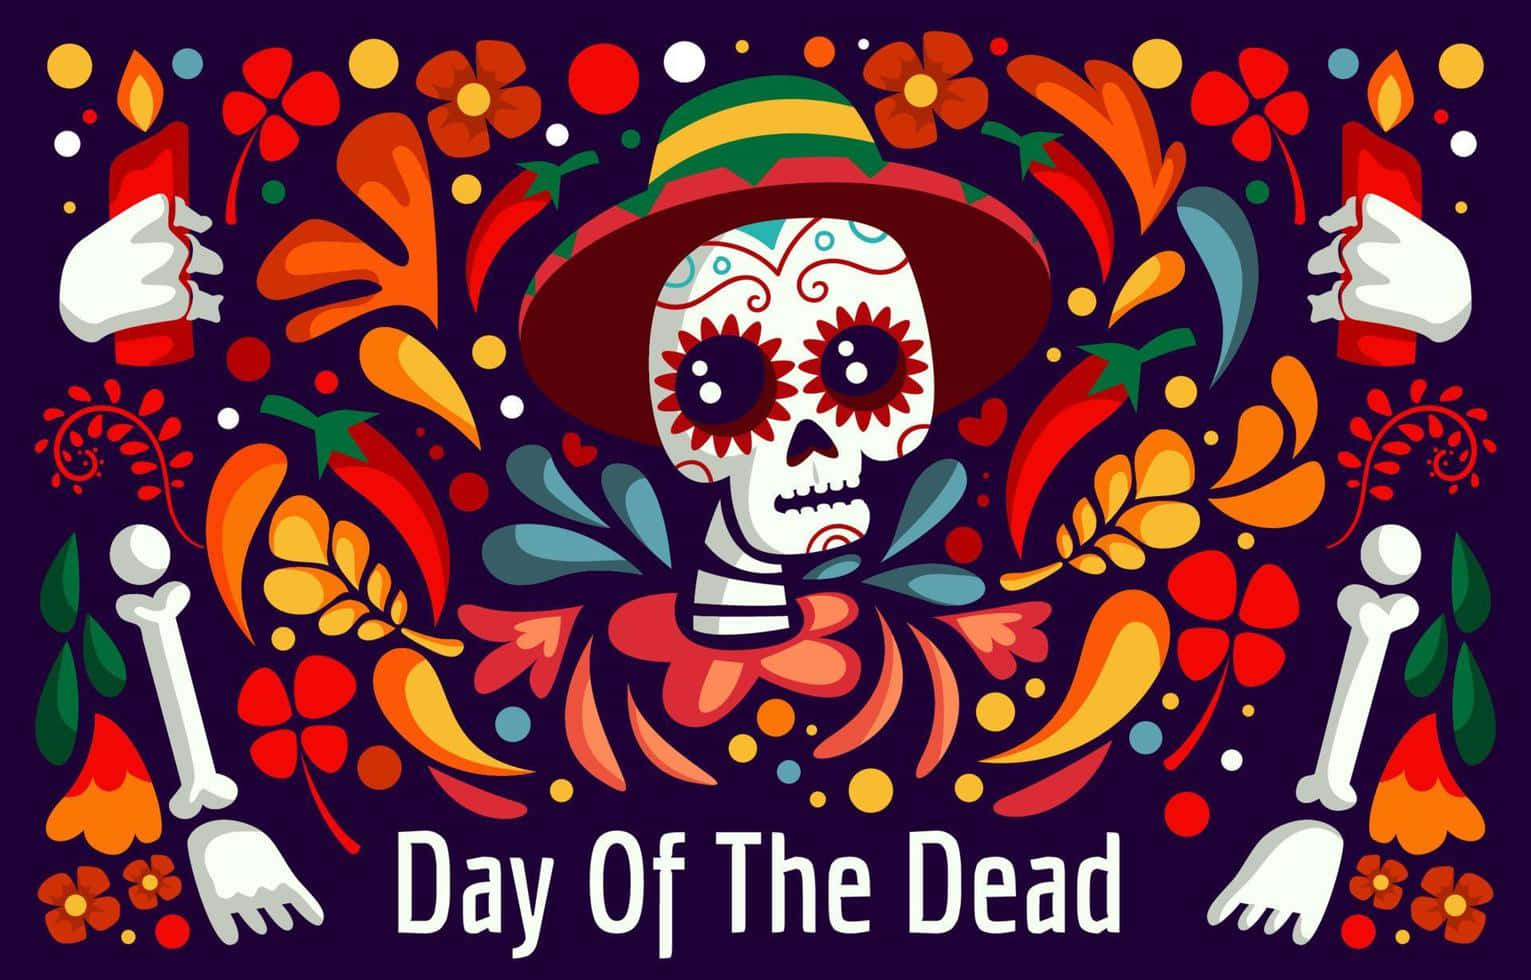 Day Of The Dead - Colorful Skull With Flowers And Candles